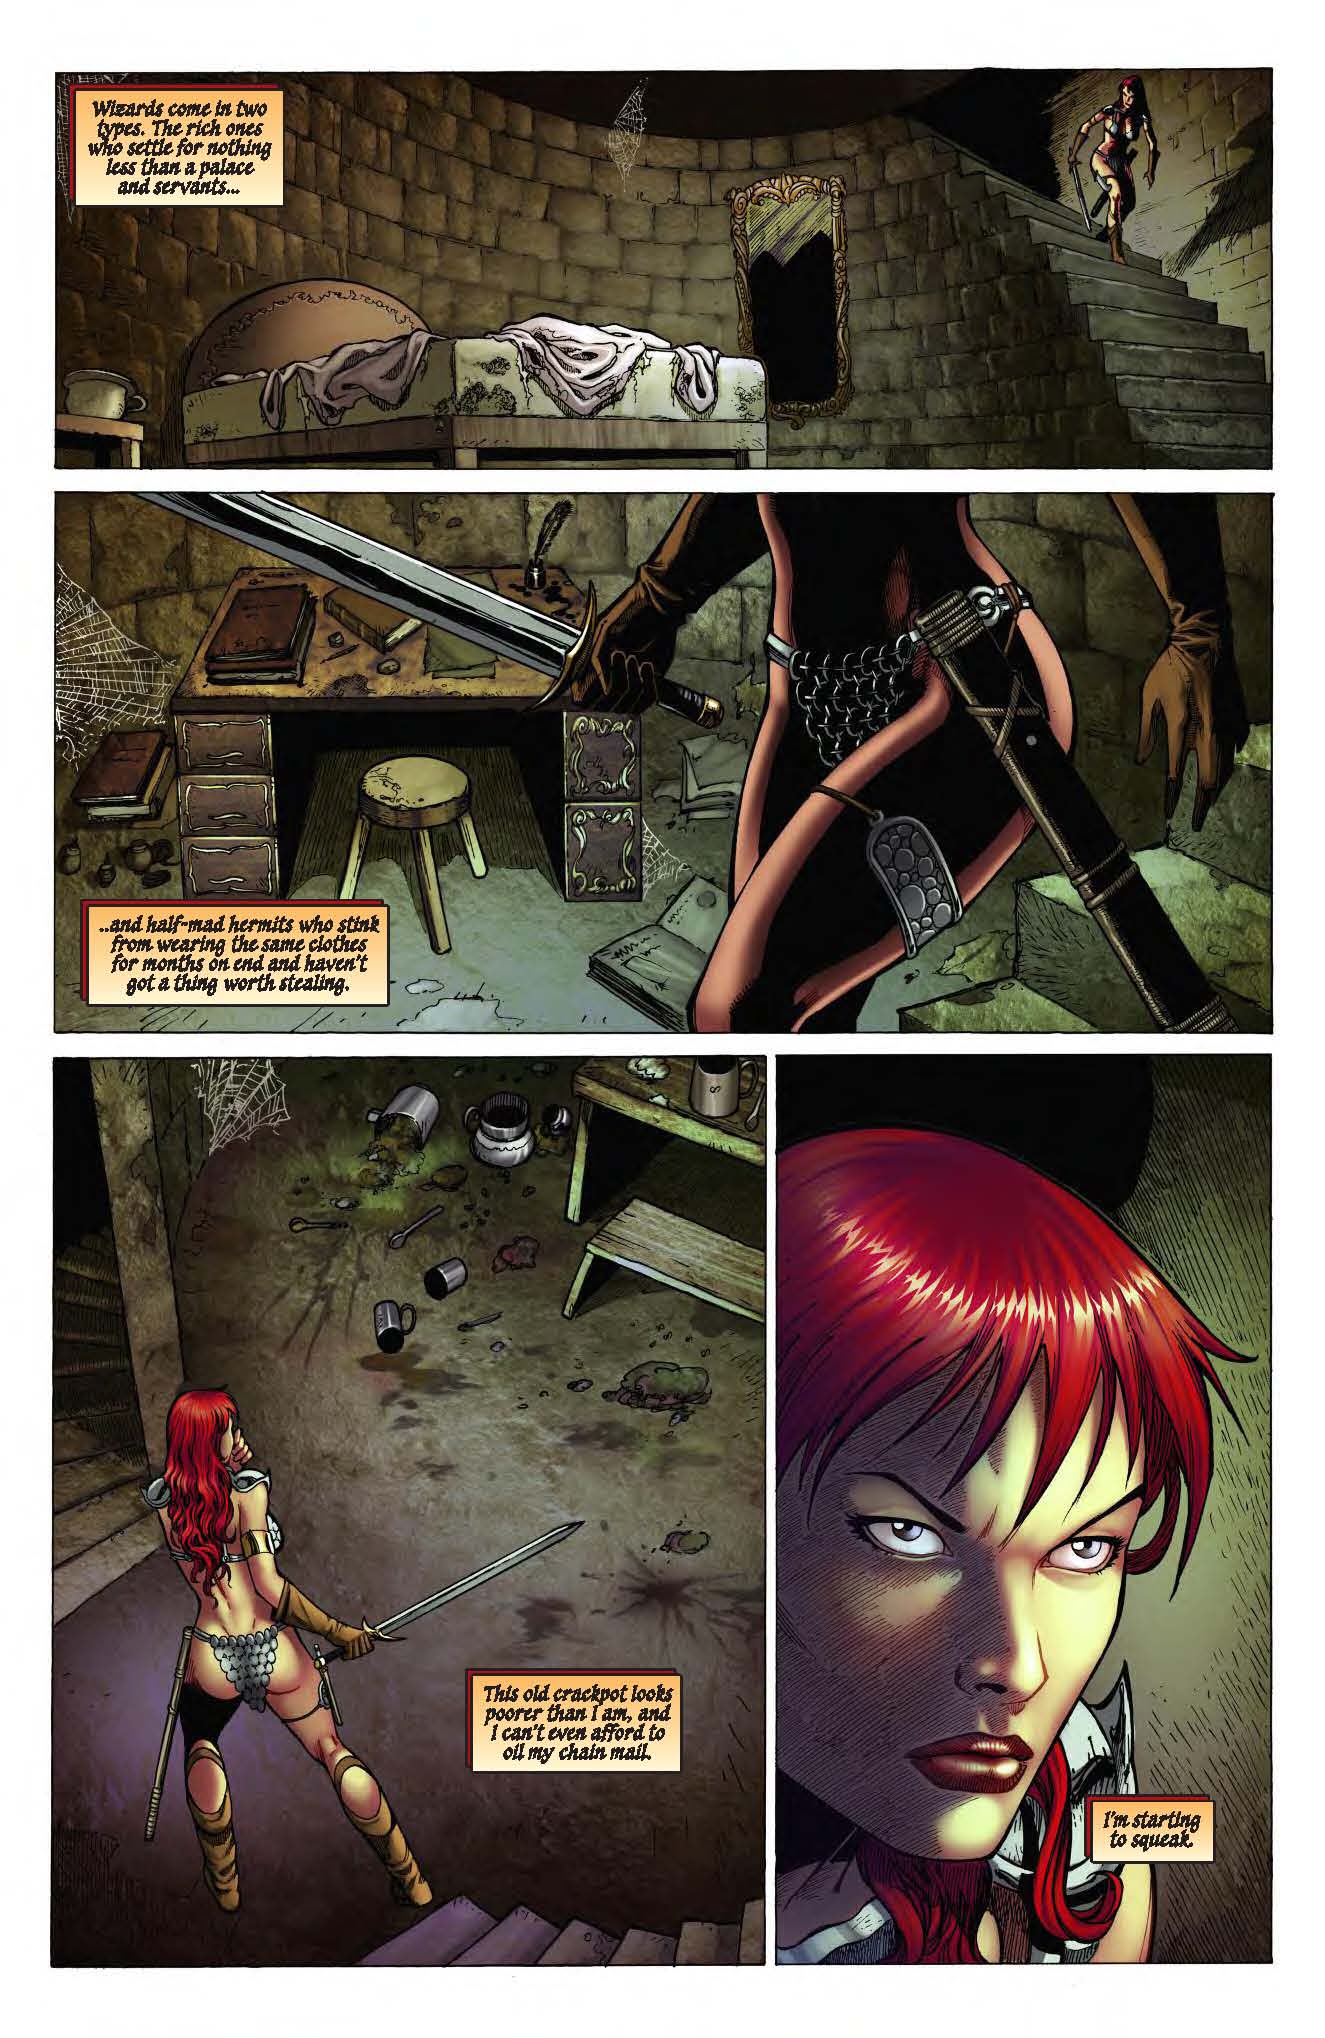 Red Sonja: Unchained Pics, Comics Collection